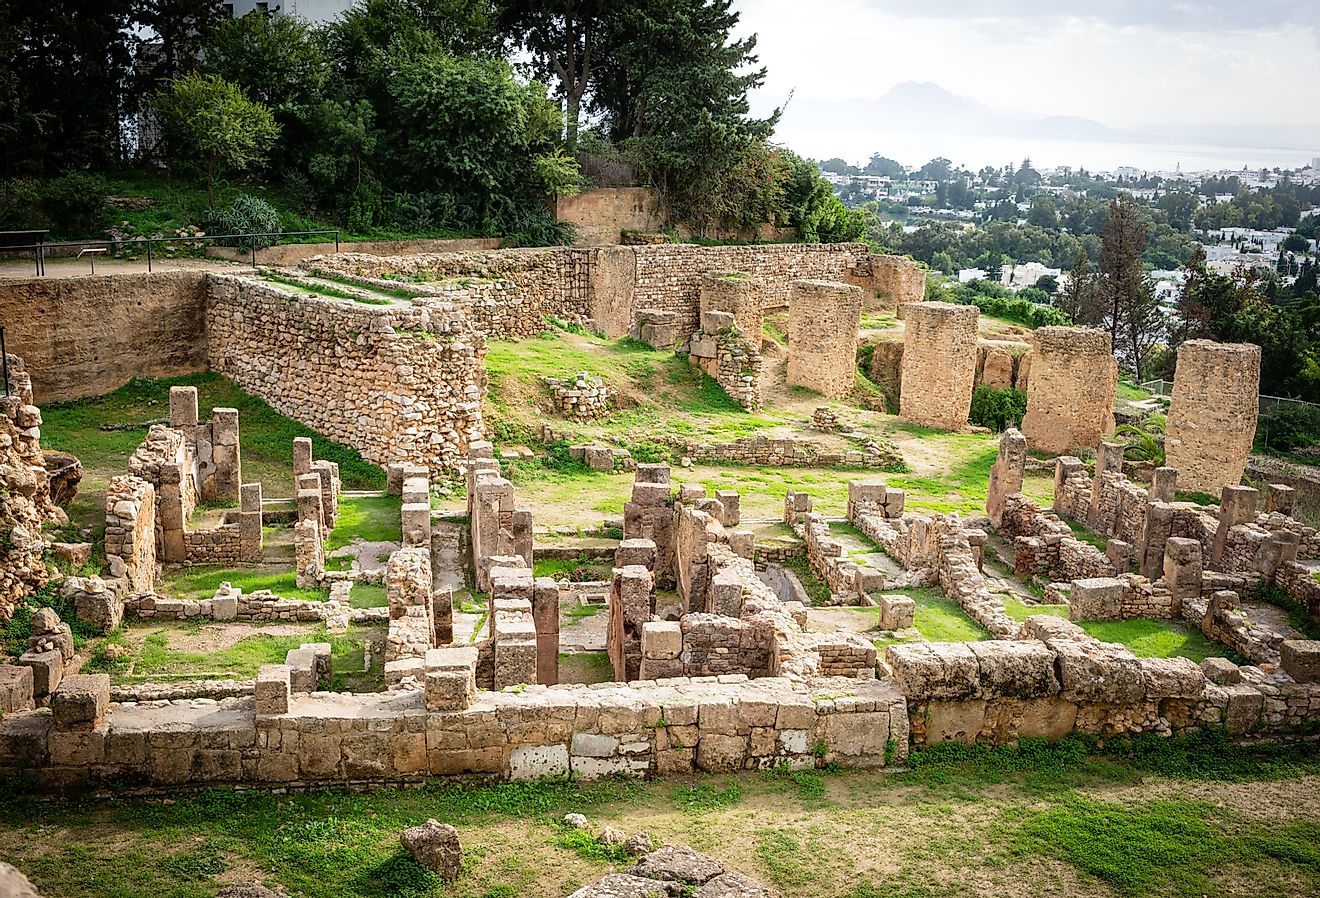 Ruins of the city of Carthage; all that is left from Rome's infamous city in Tunisia.